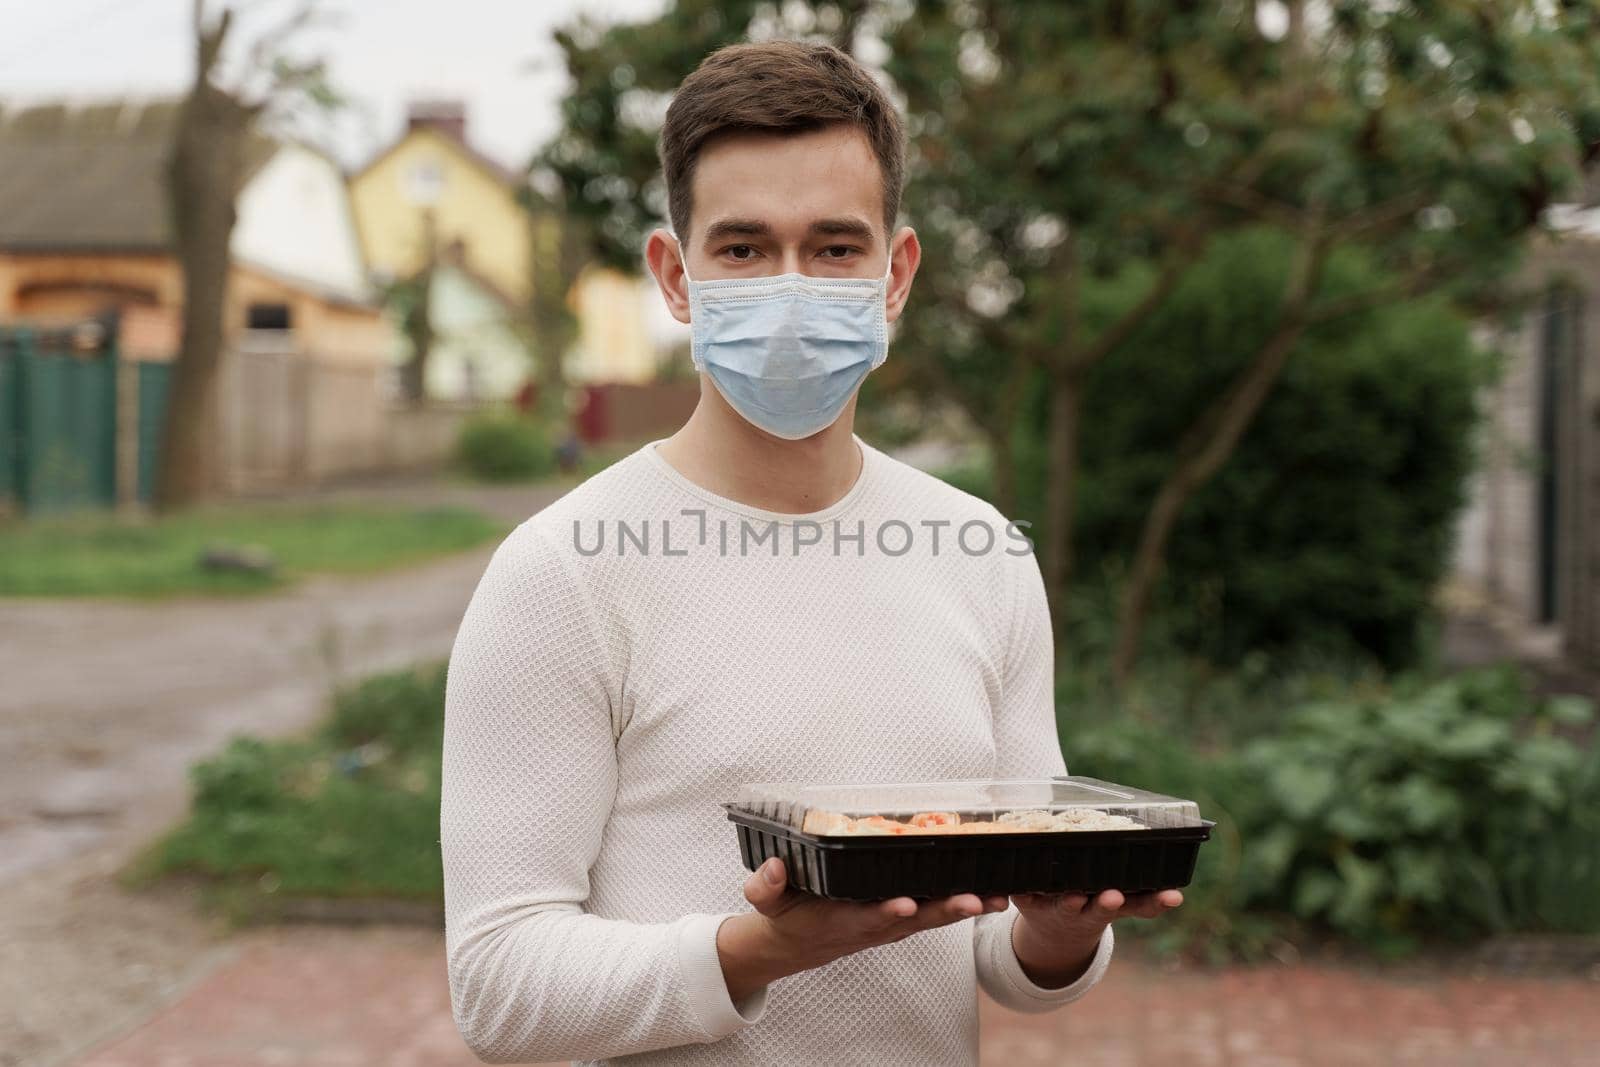 Sushi set in box healthy food delivery online service by car. Man courier in medical mask with sushi box stands in front of car